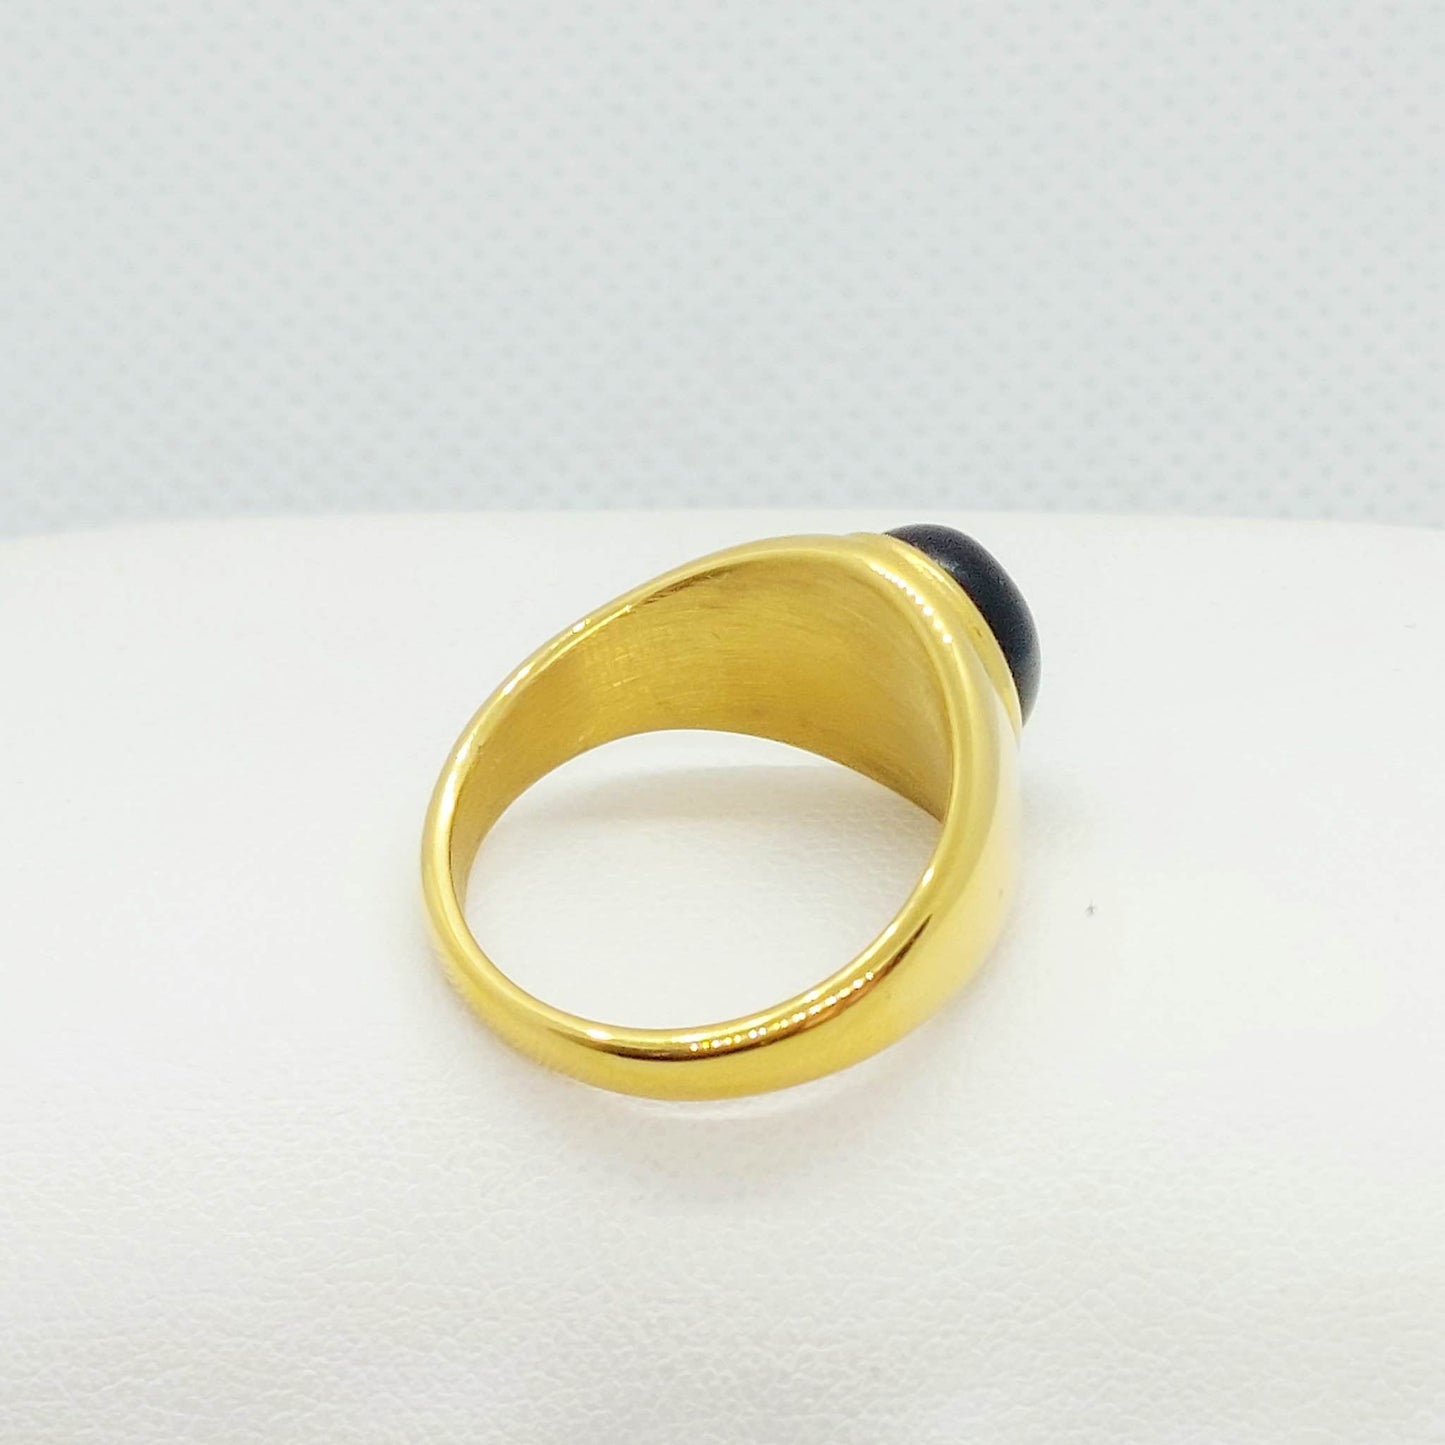 Natural Obsidian Ring in Gold Plated Stainless Steel